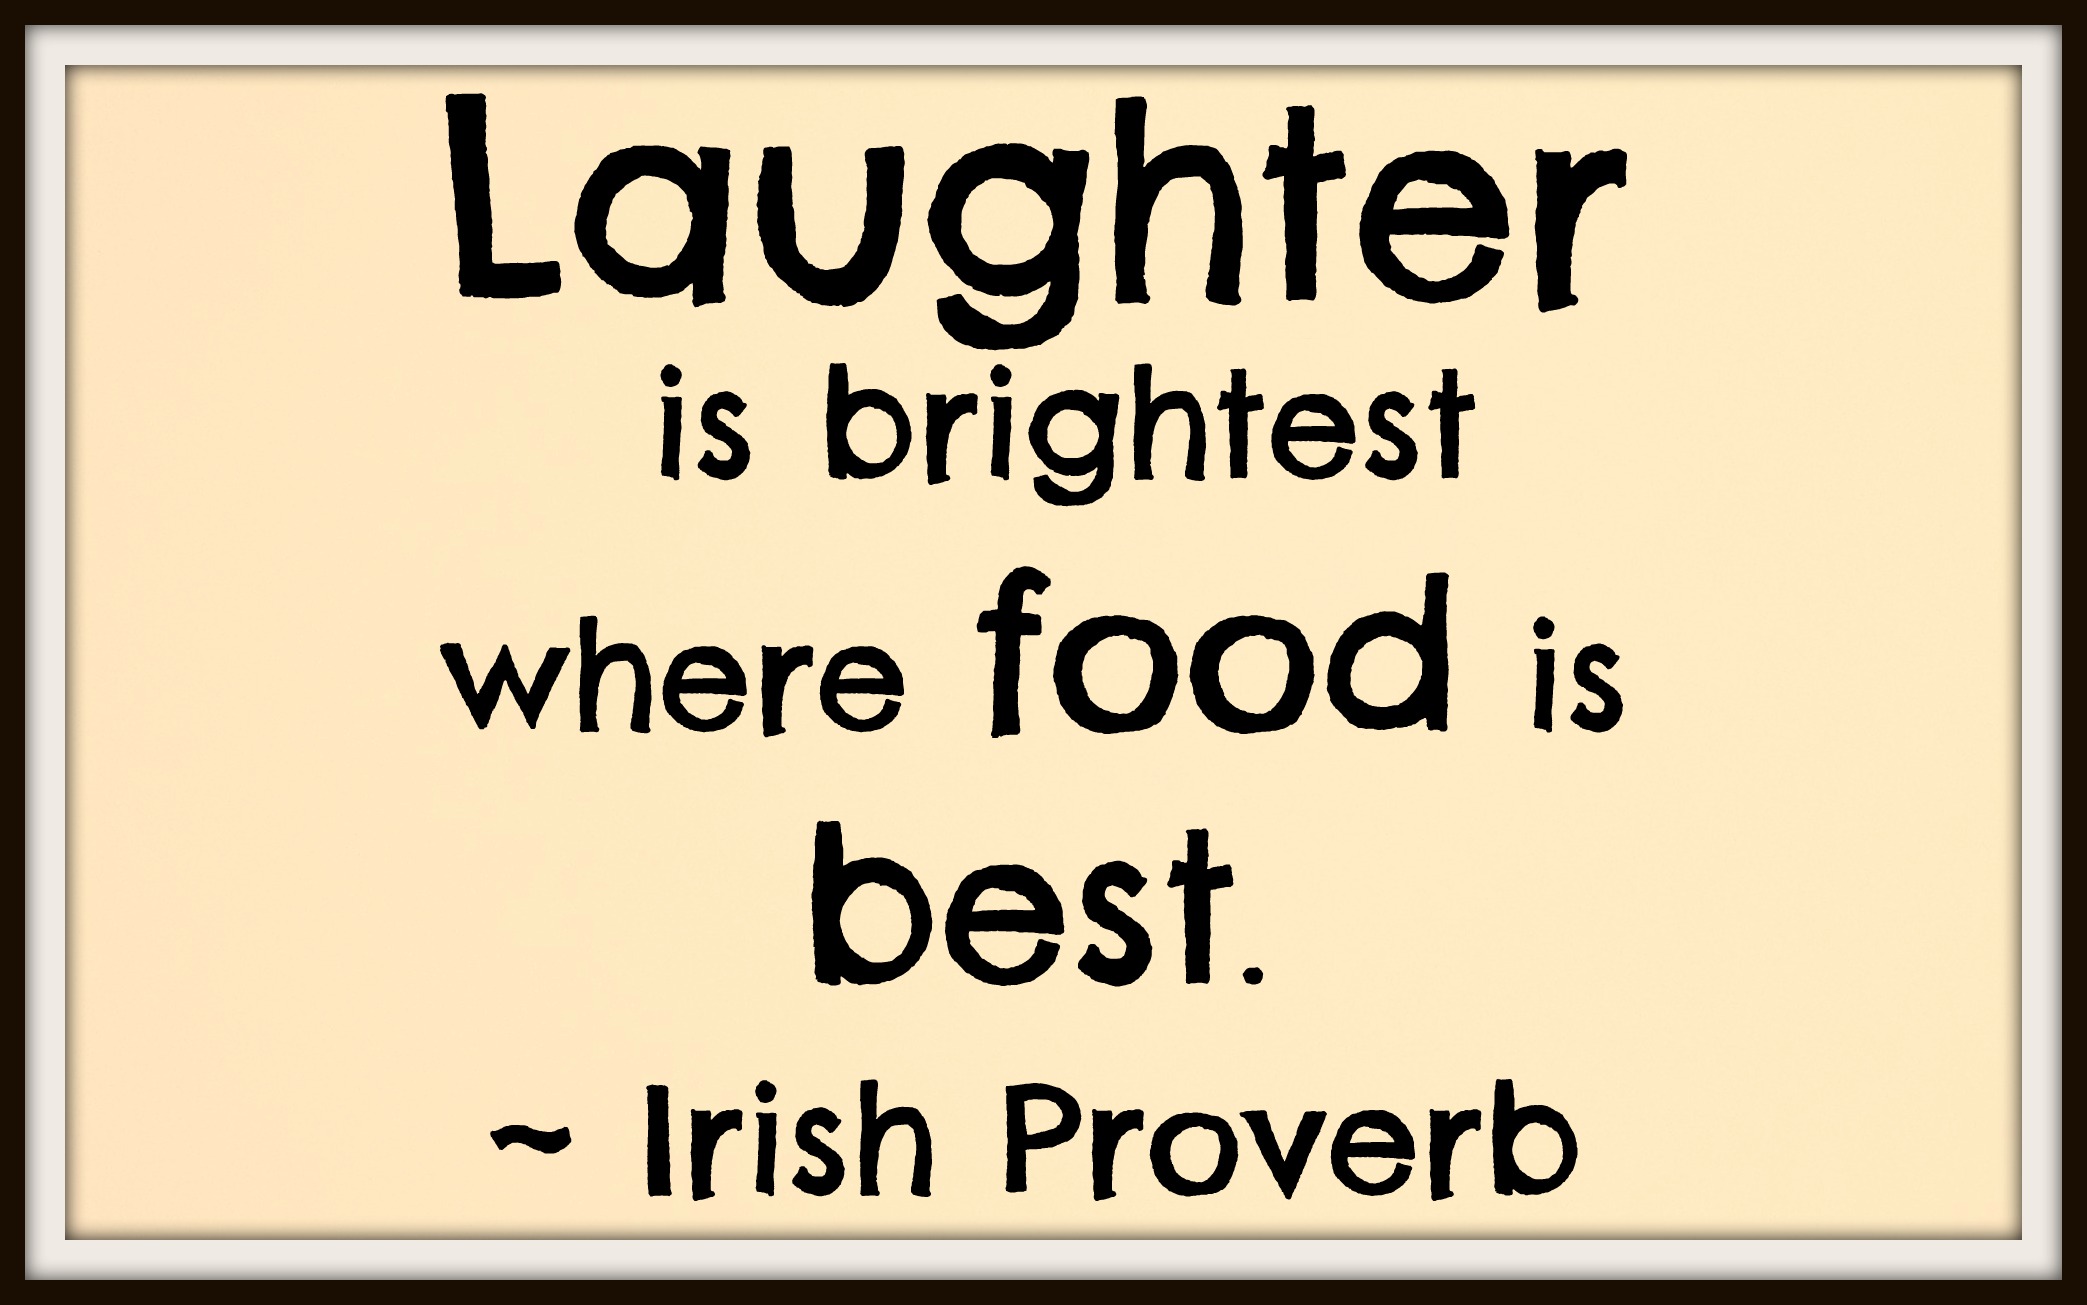 Laughter is brightest where food is best Irish Proverb